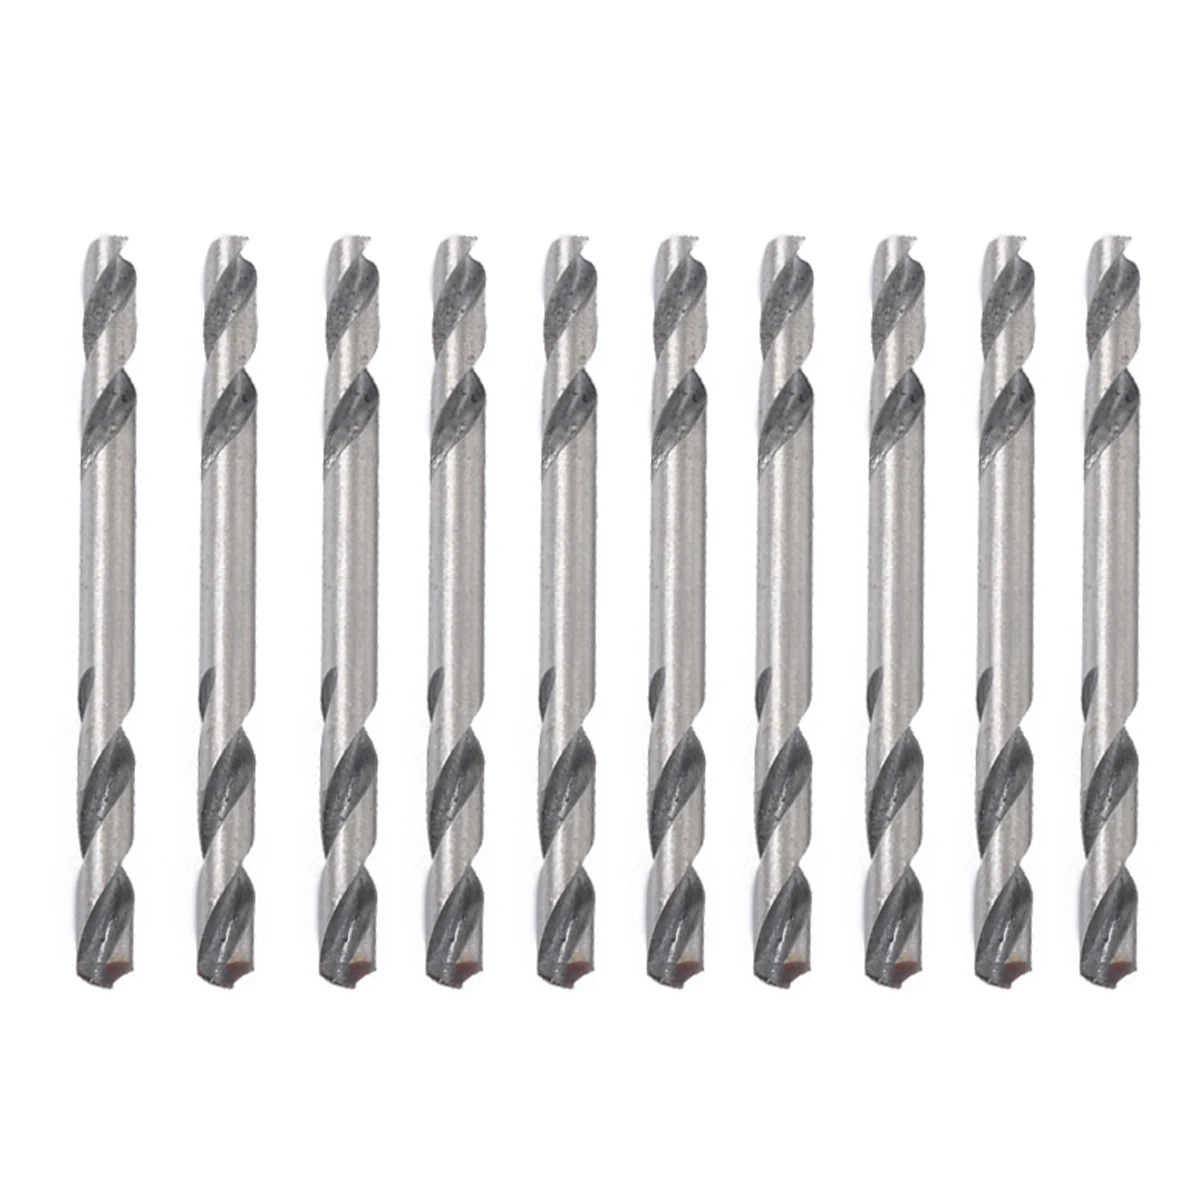 10pcs 3.2mm Diam Double Ended Drill Bits HSS Twist Cutter Practical Drilling Tool for Stainless Steel Wood